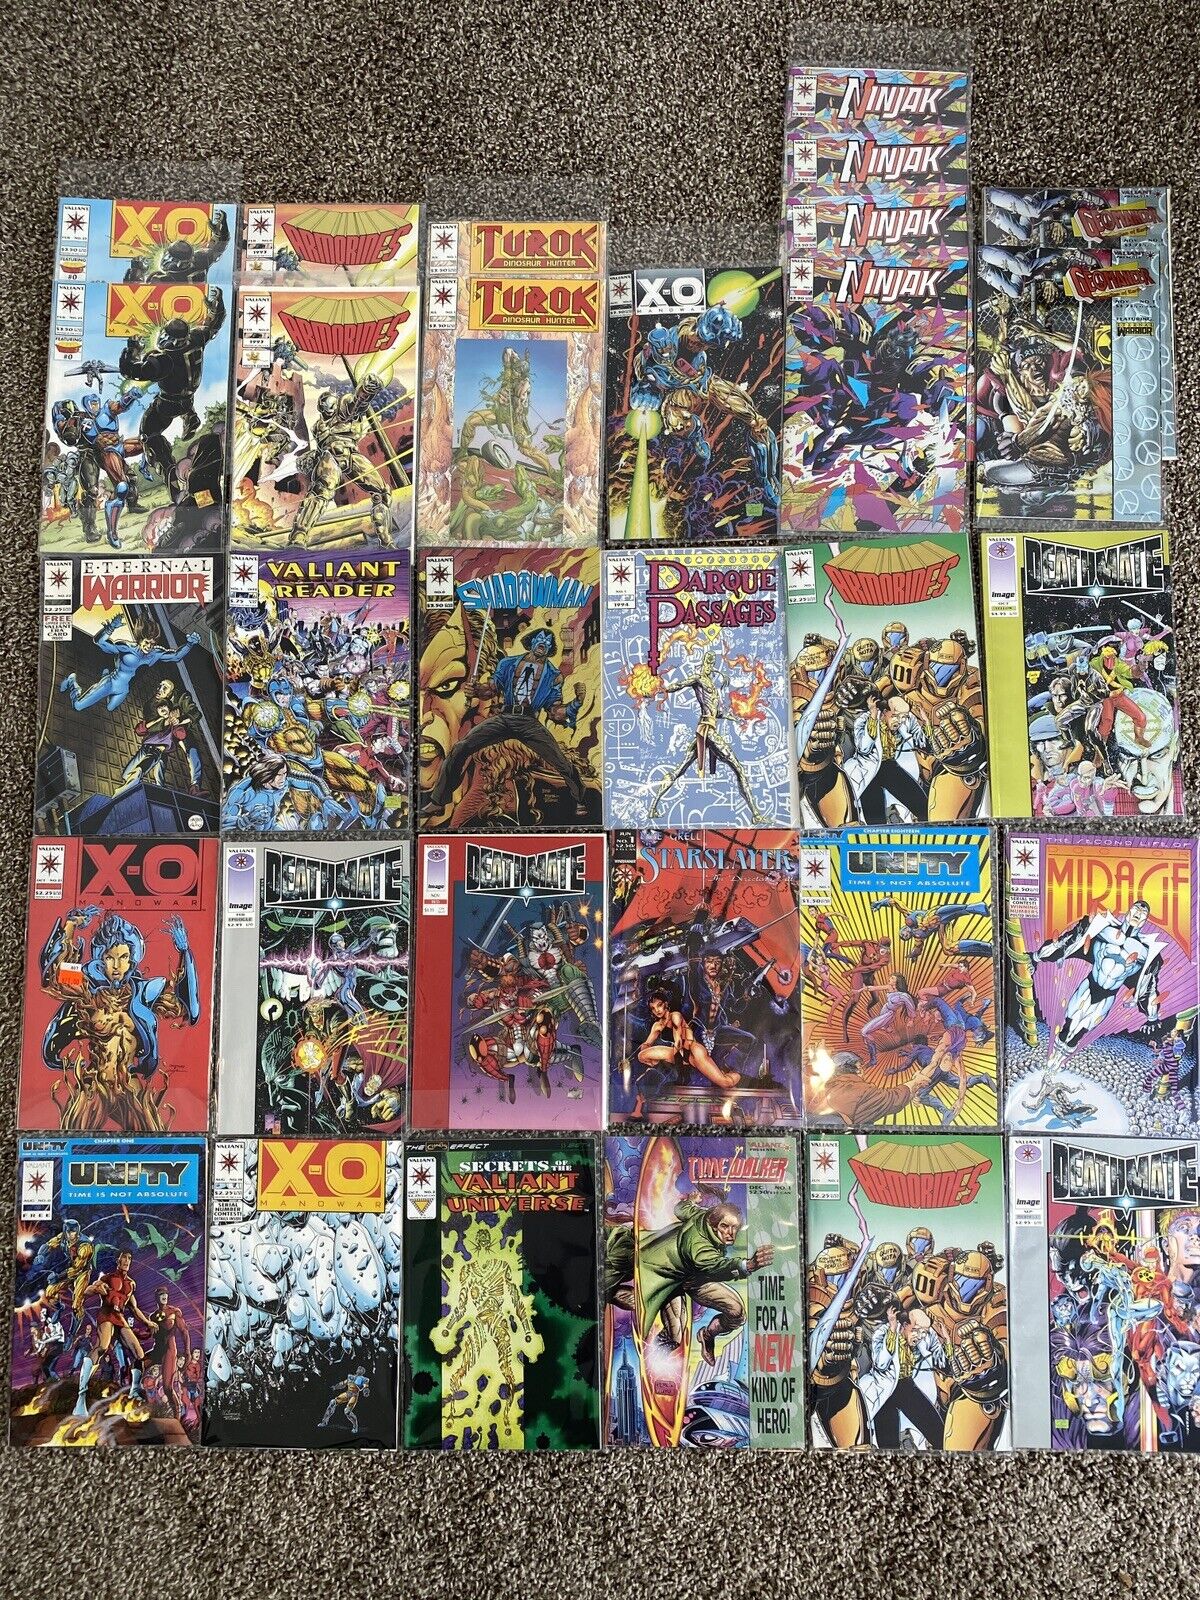 32 Great Condition Valiant Comic Book Lot. With Magnus Robot Fighter AUTO. W/COA